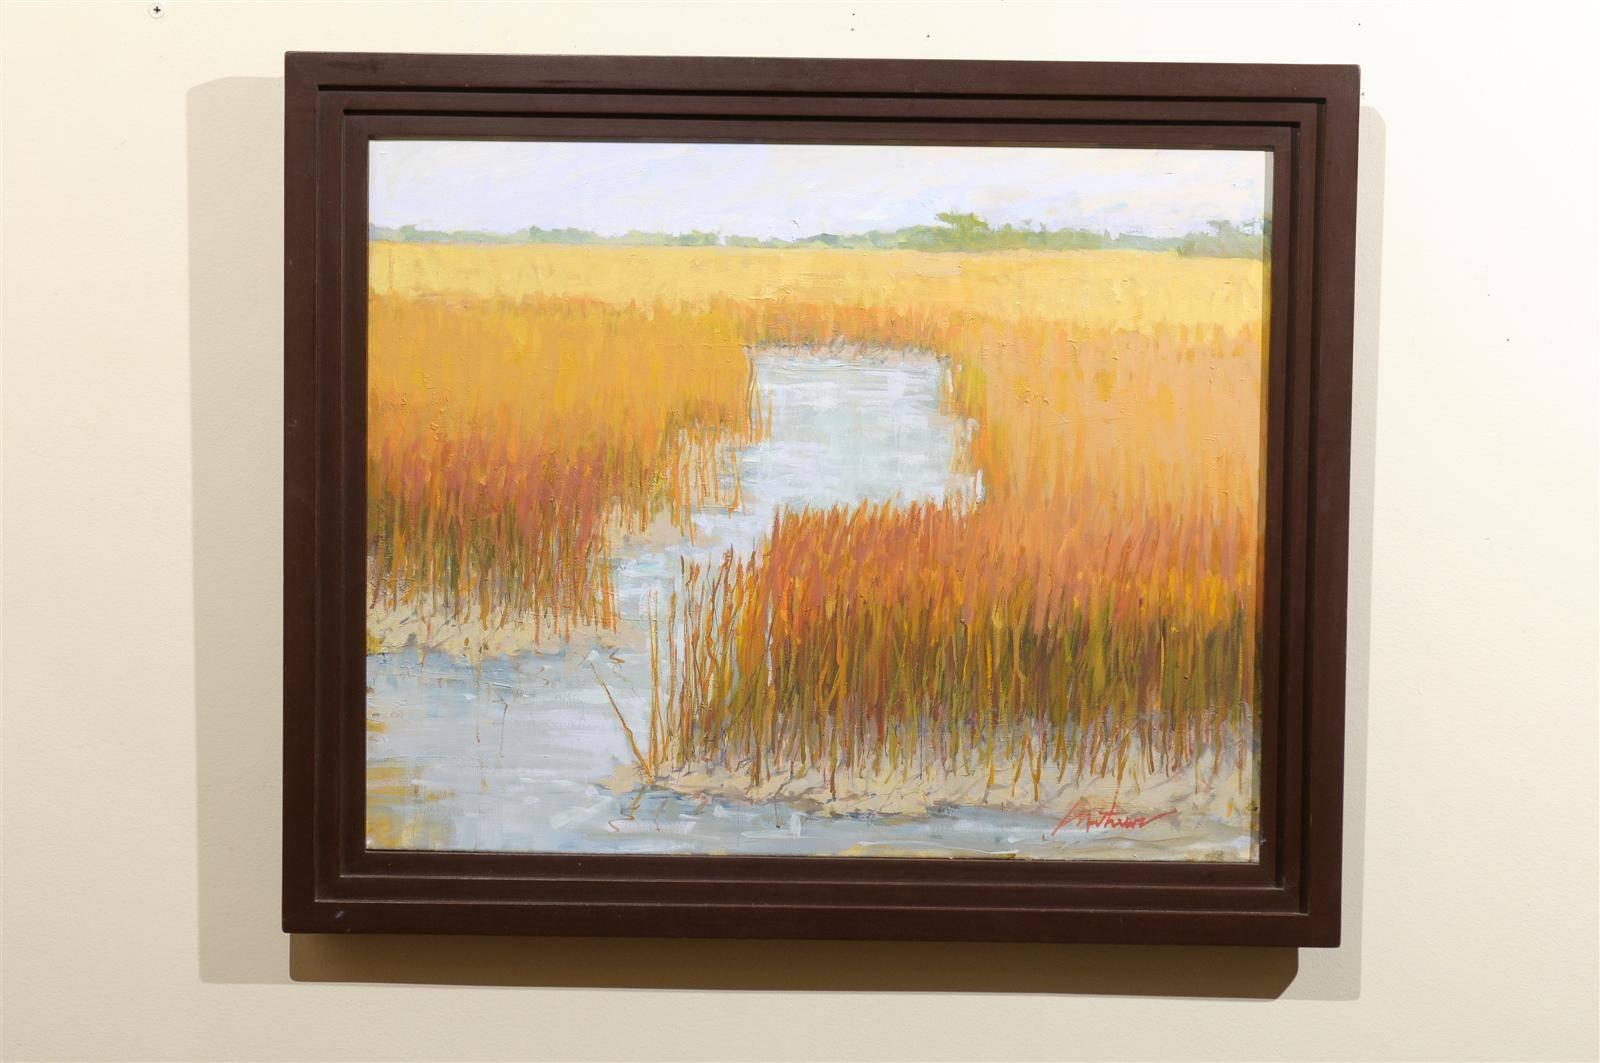 This beautiful oil painting is of the marshes of Sea Island and St Simmons in Glynn County. Georgia artist Libby Mathews shows the spirit of the landscape she is painting through their reflections, illuminations and shadows.